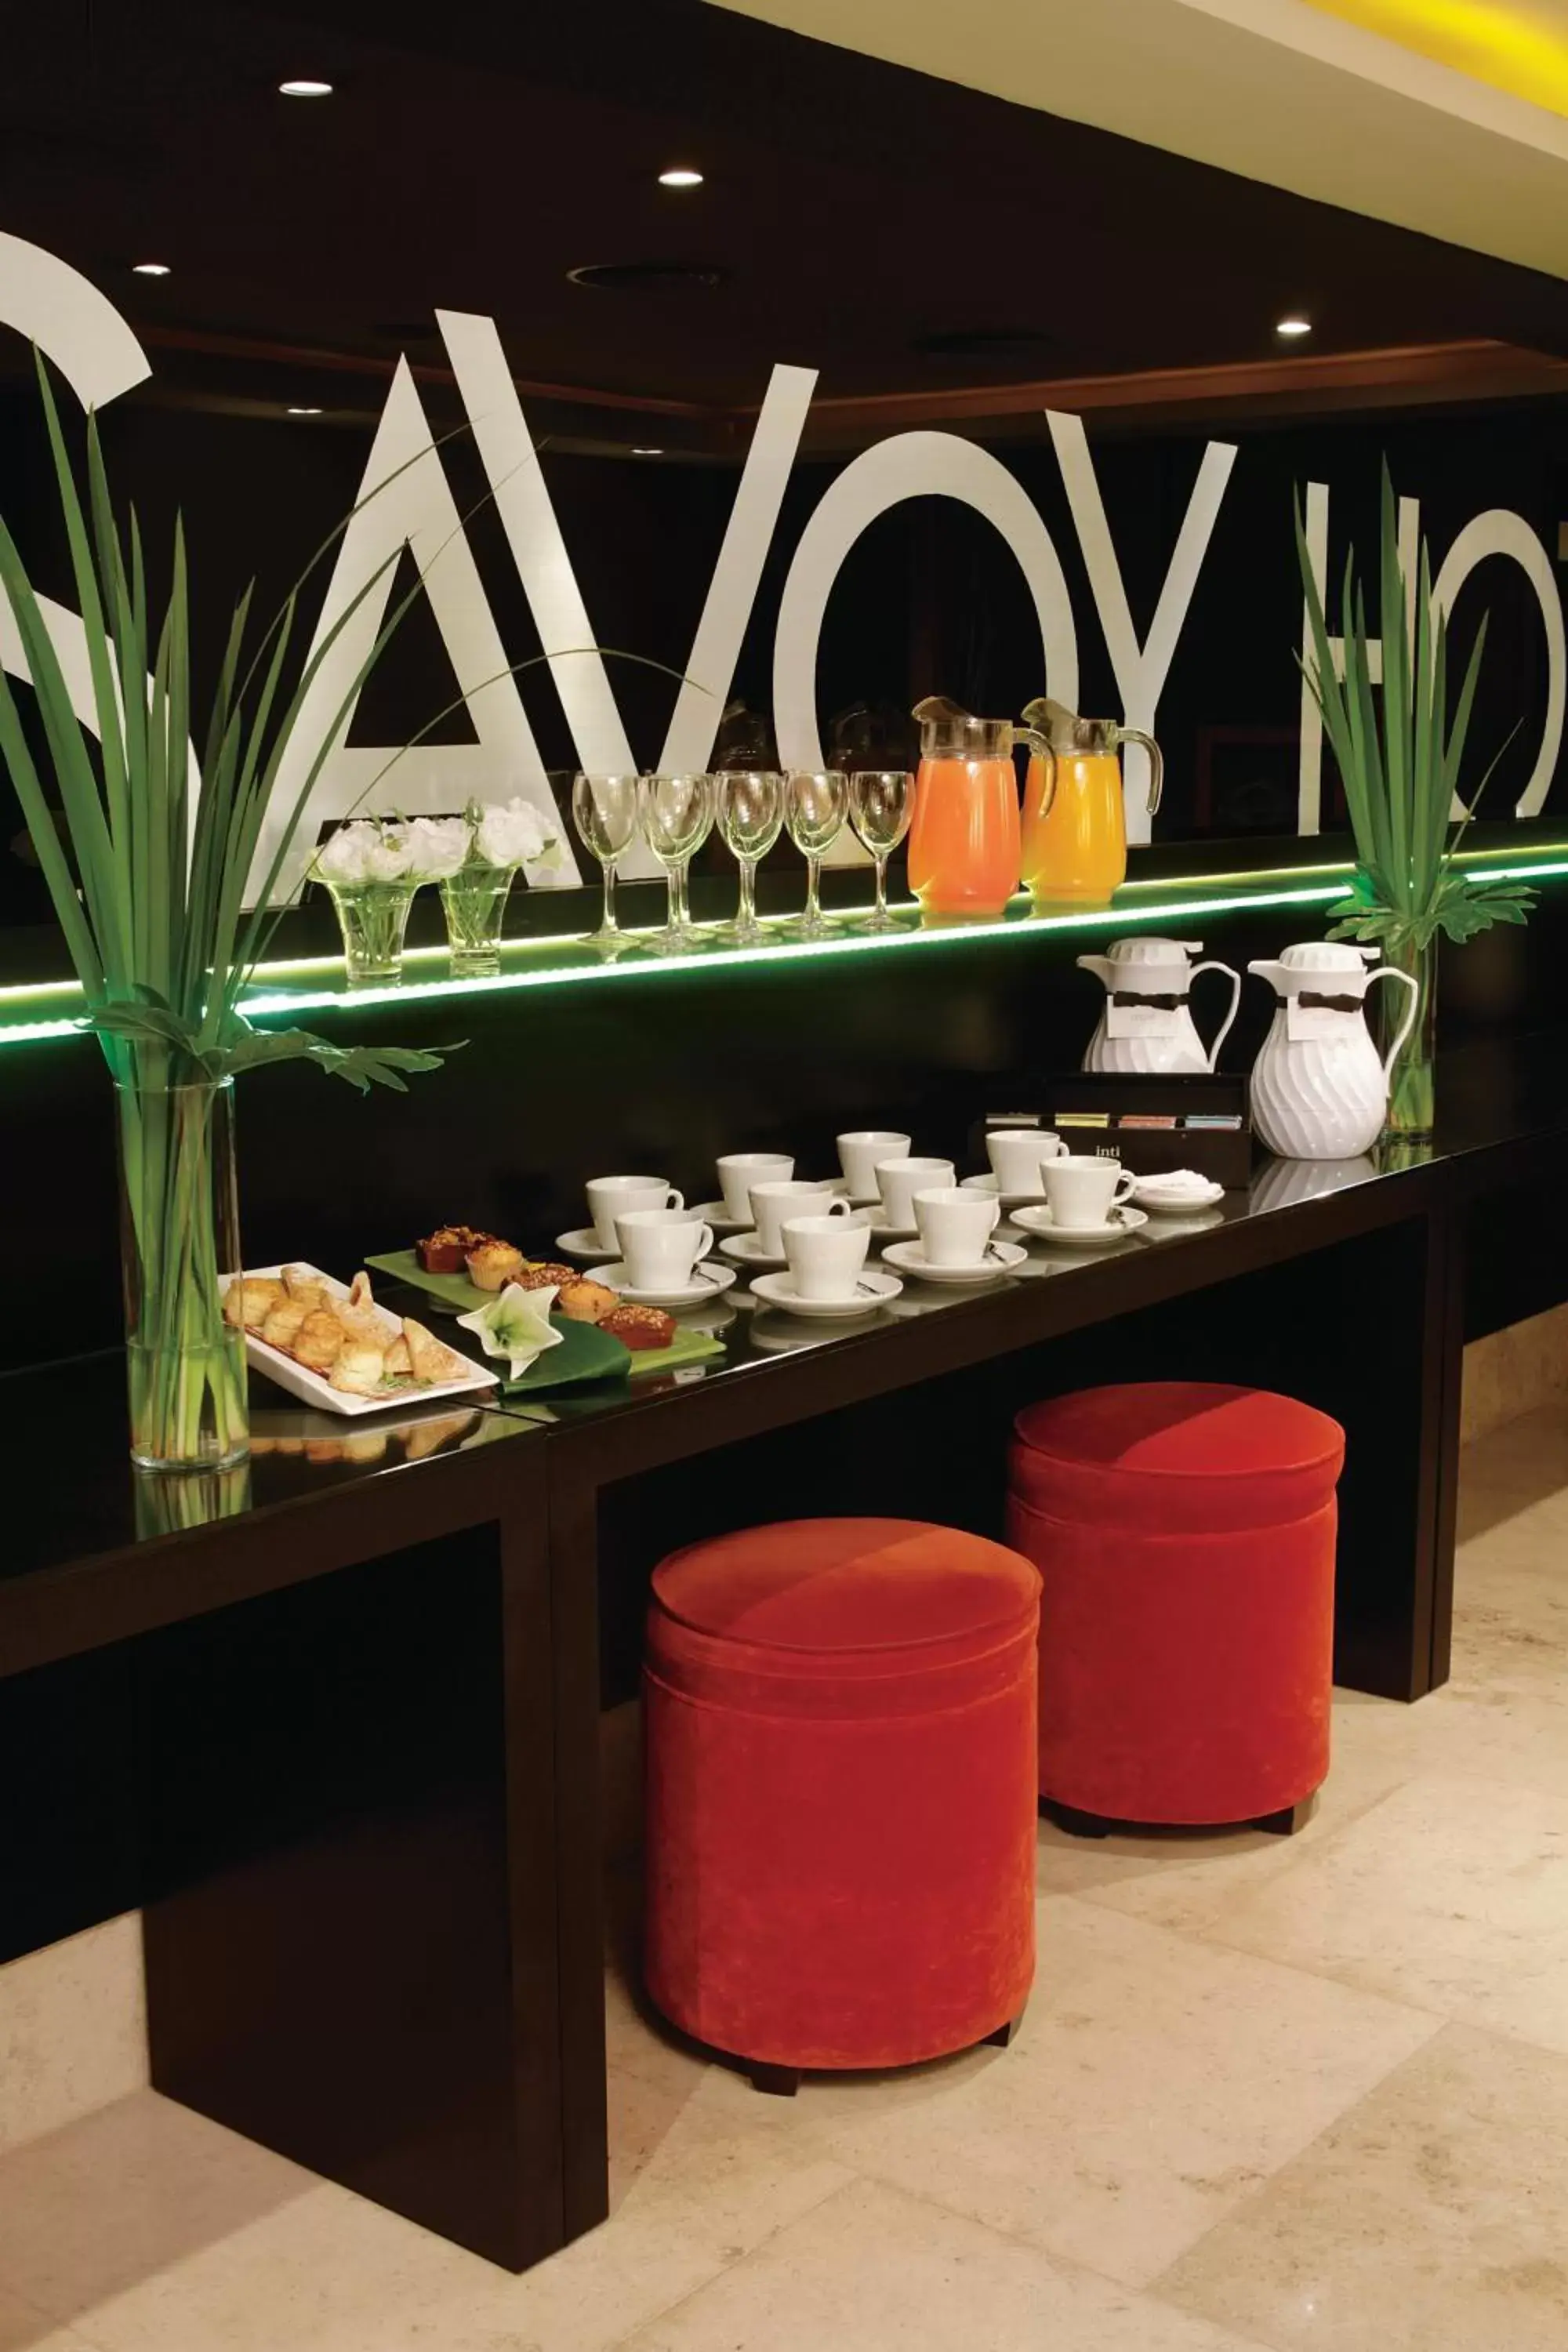 Business facilities in Savoy Hotel